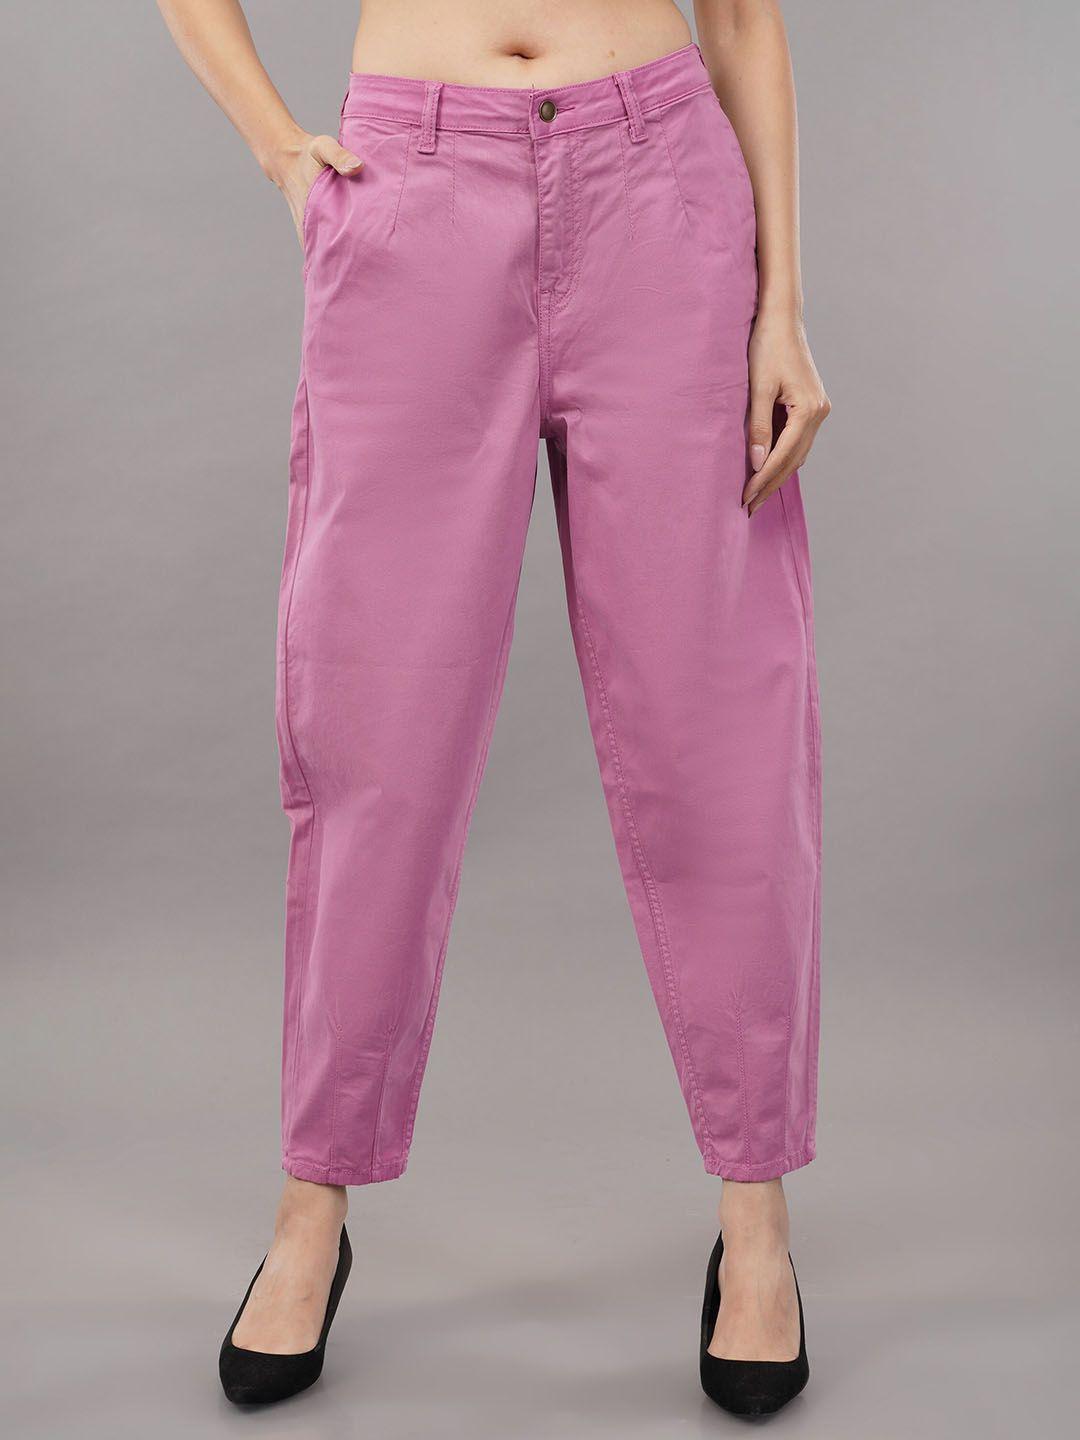 the roadster lifestyle co. magenta high rise slouchy fit denim jeans